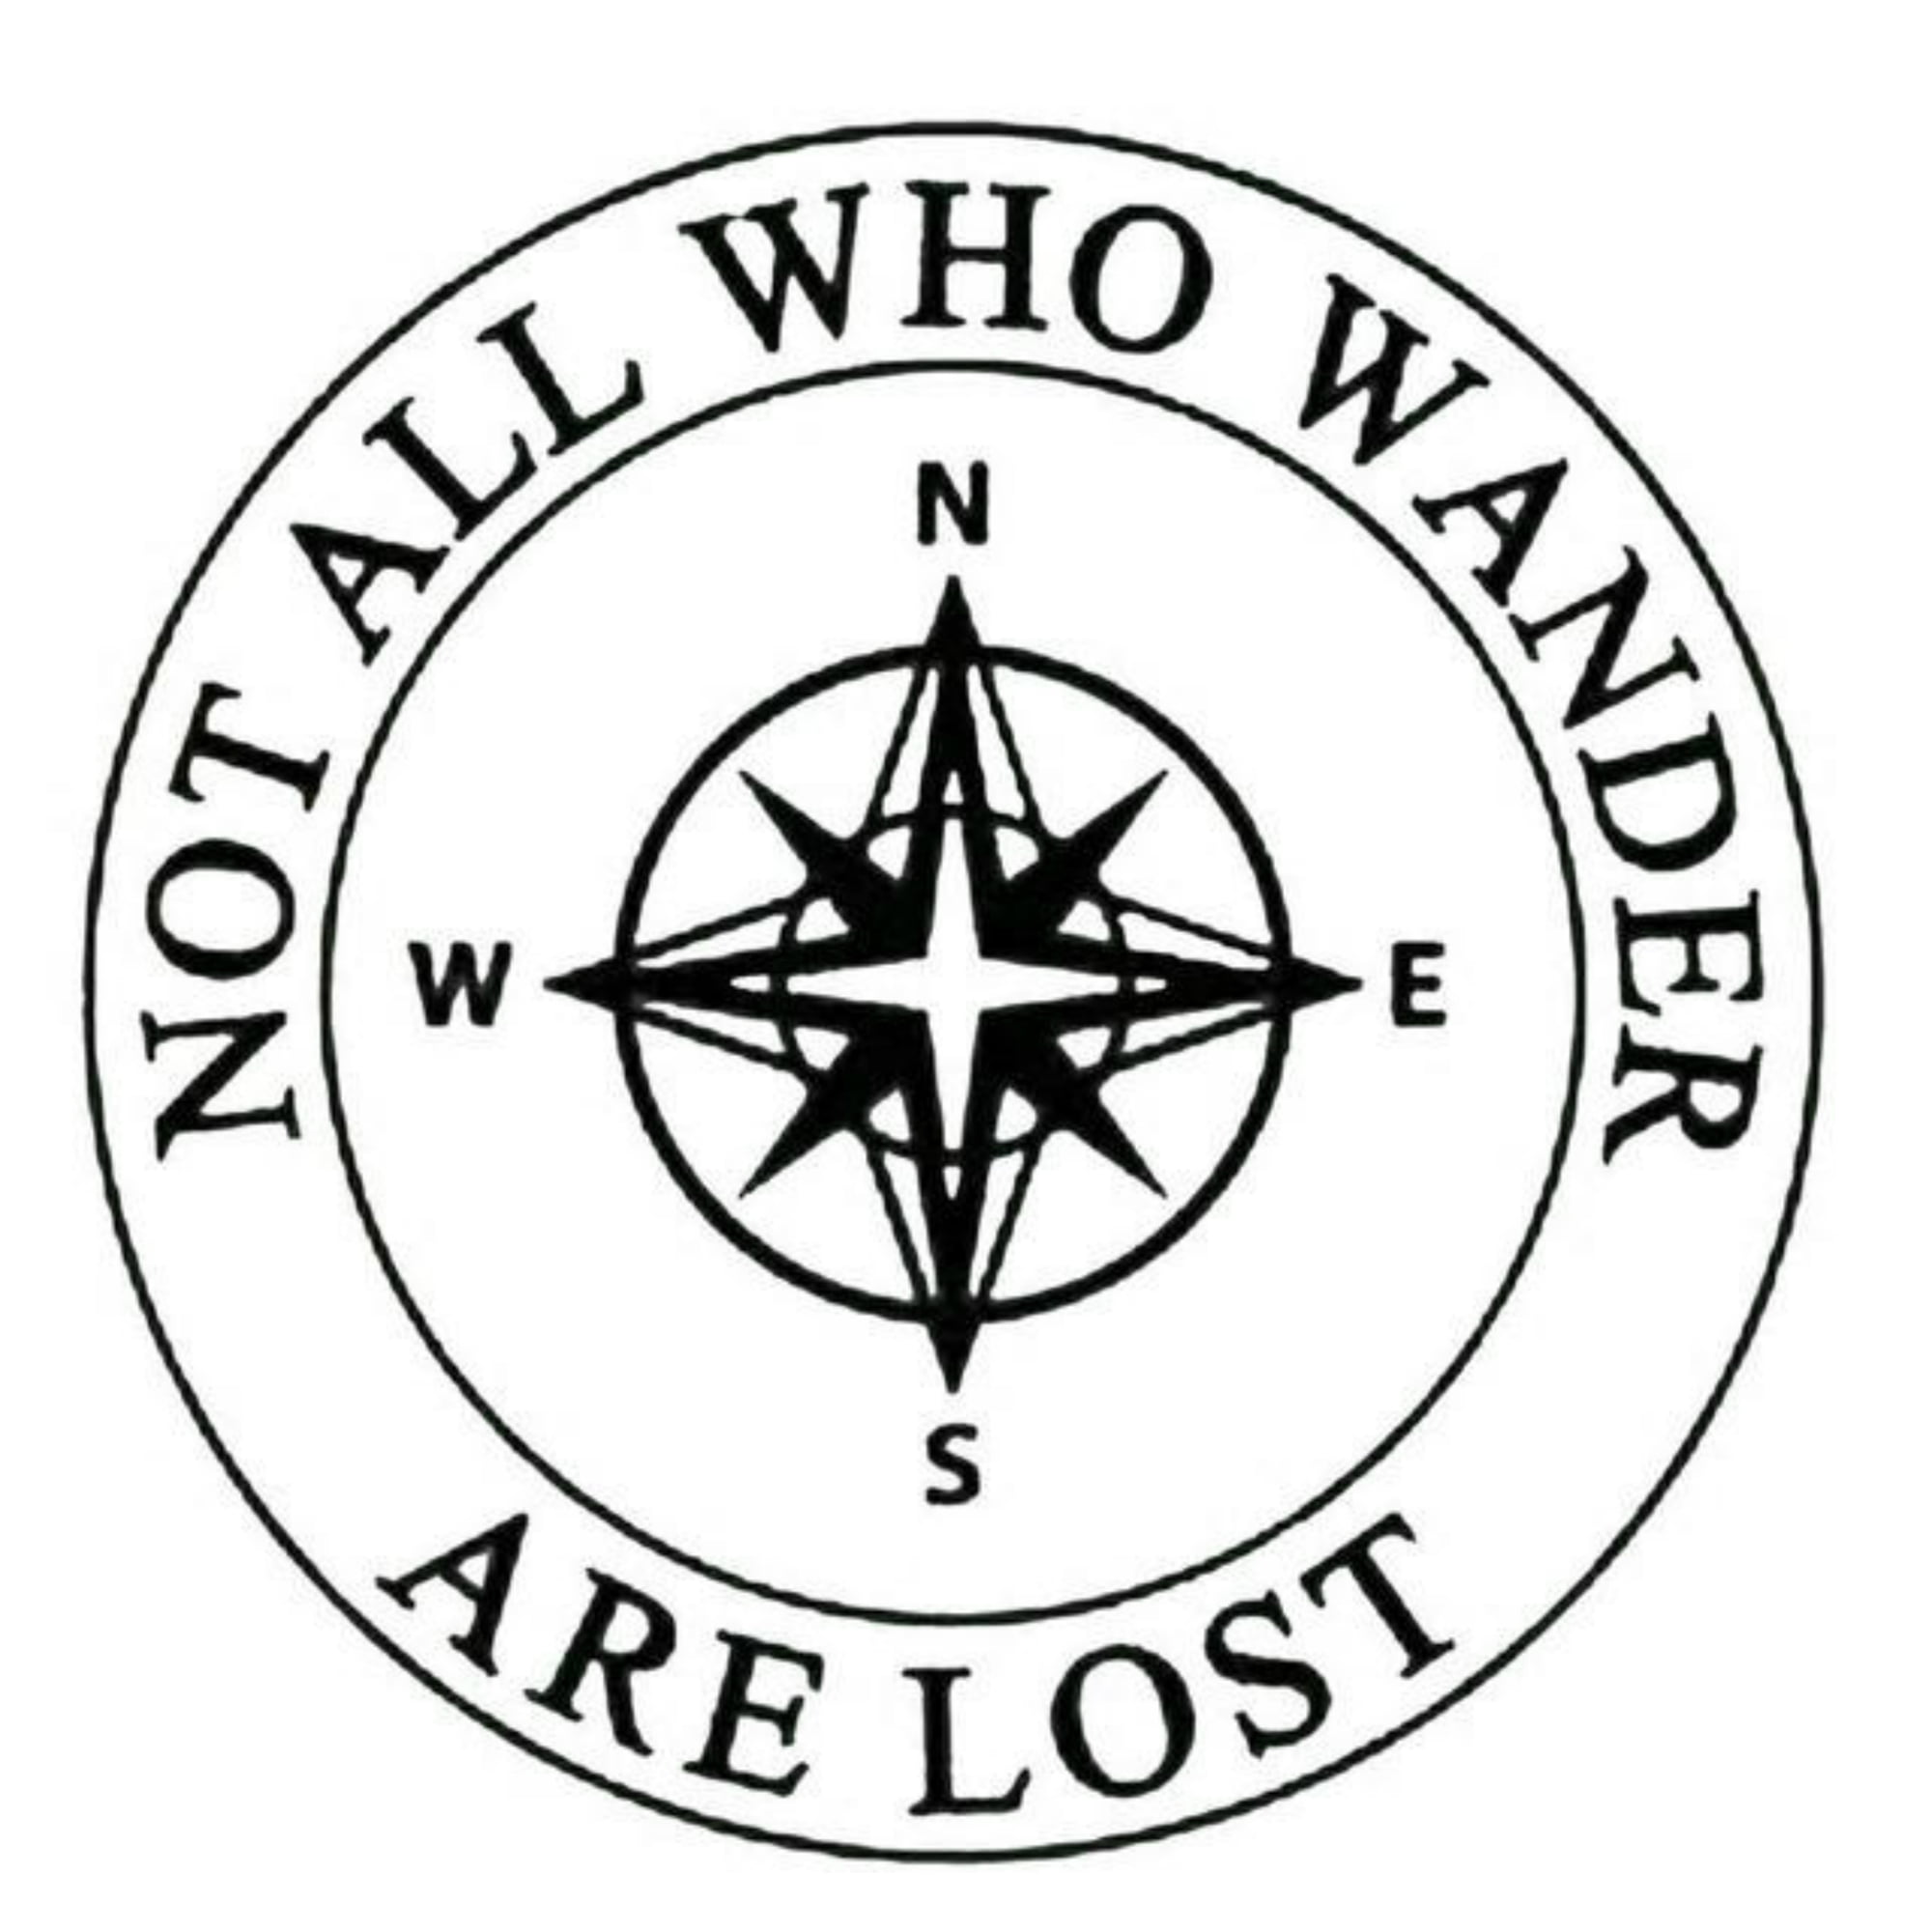 Not All Who Wander Are Lost Compass 10 Car Truck Window Bumper